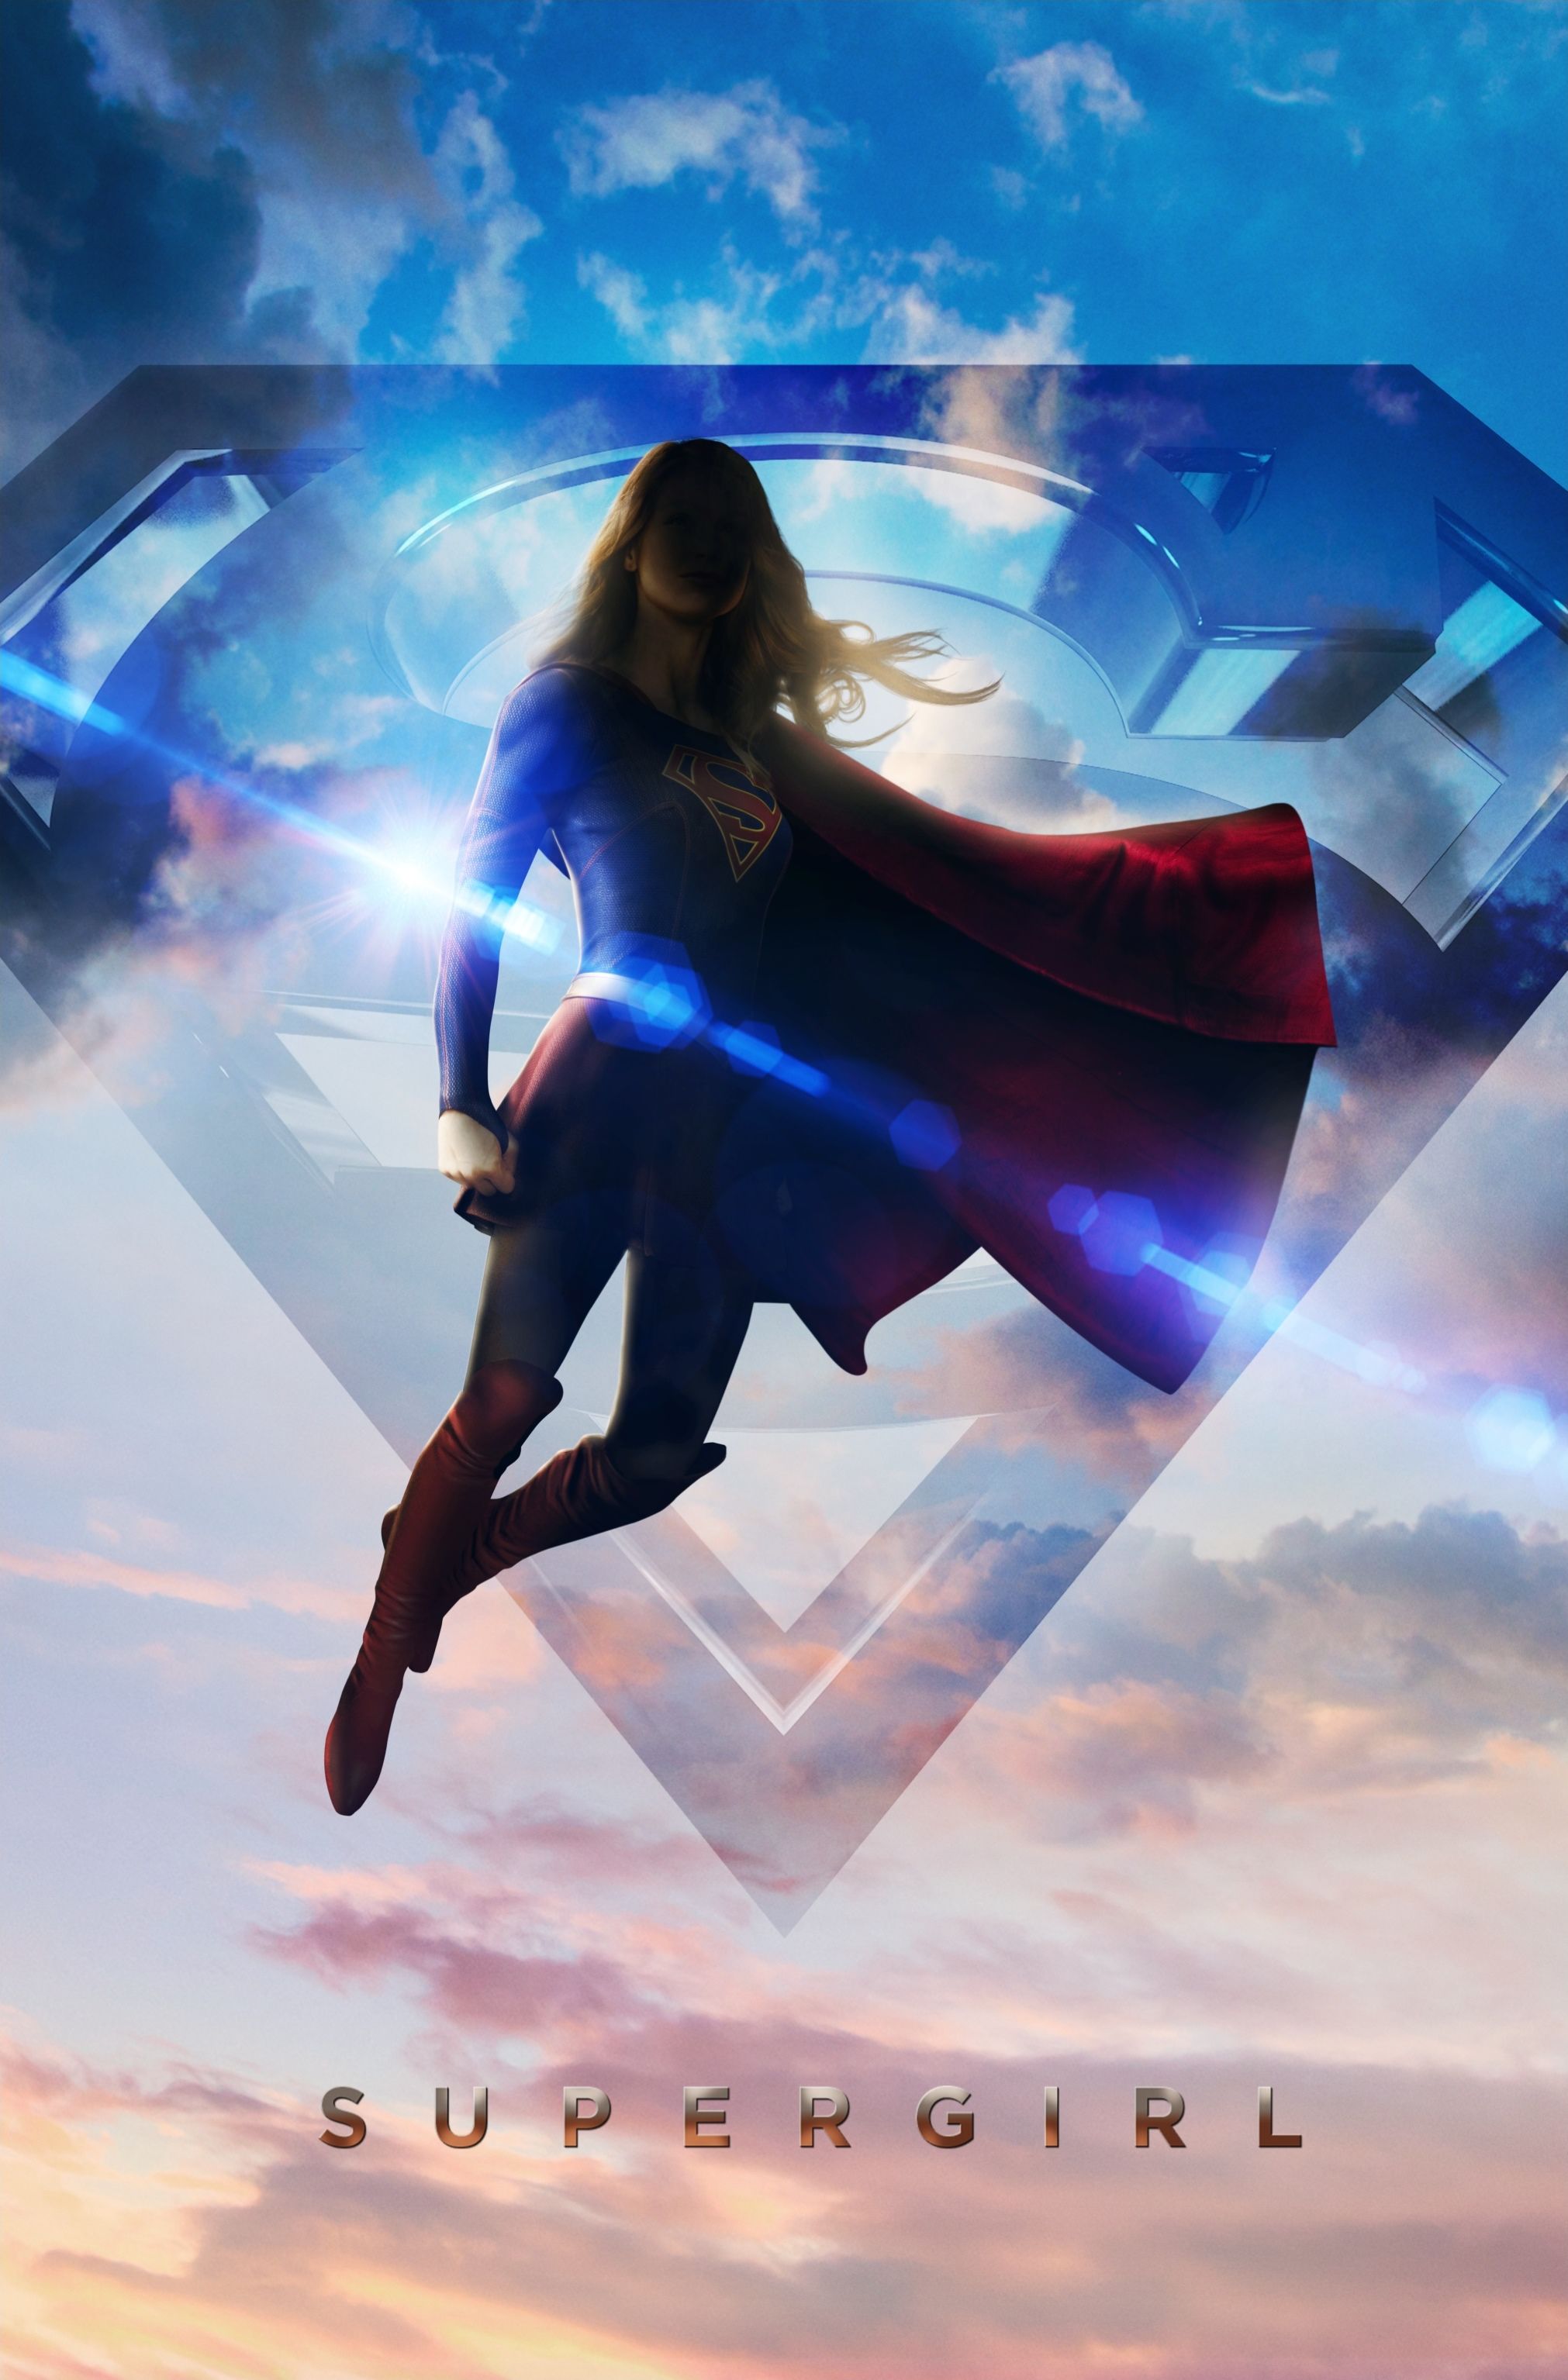 Supergirl Wallpapers – Supergirl: Maid of Might